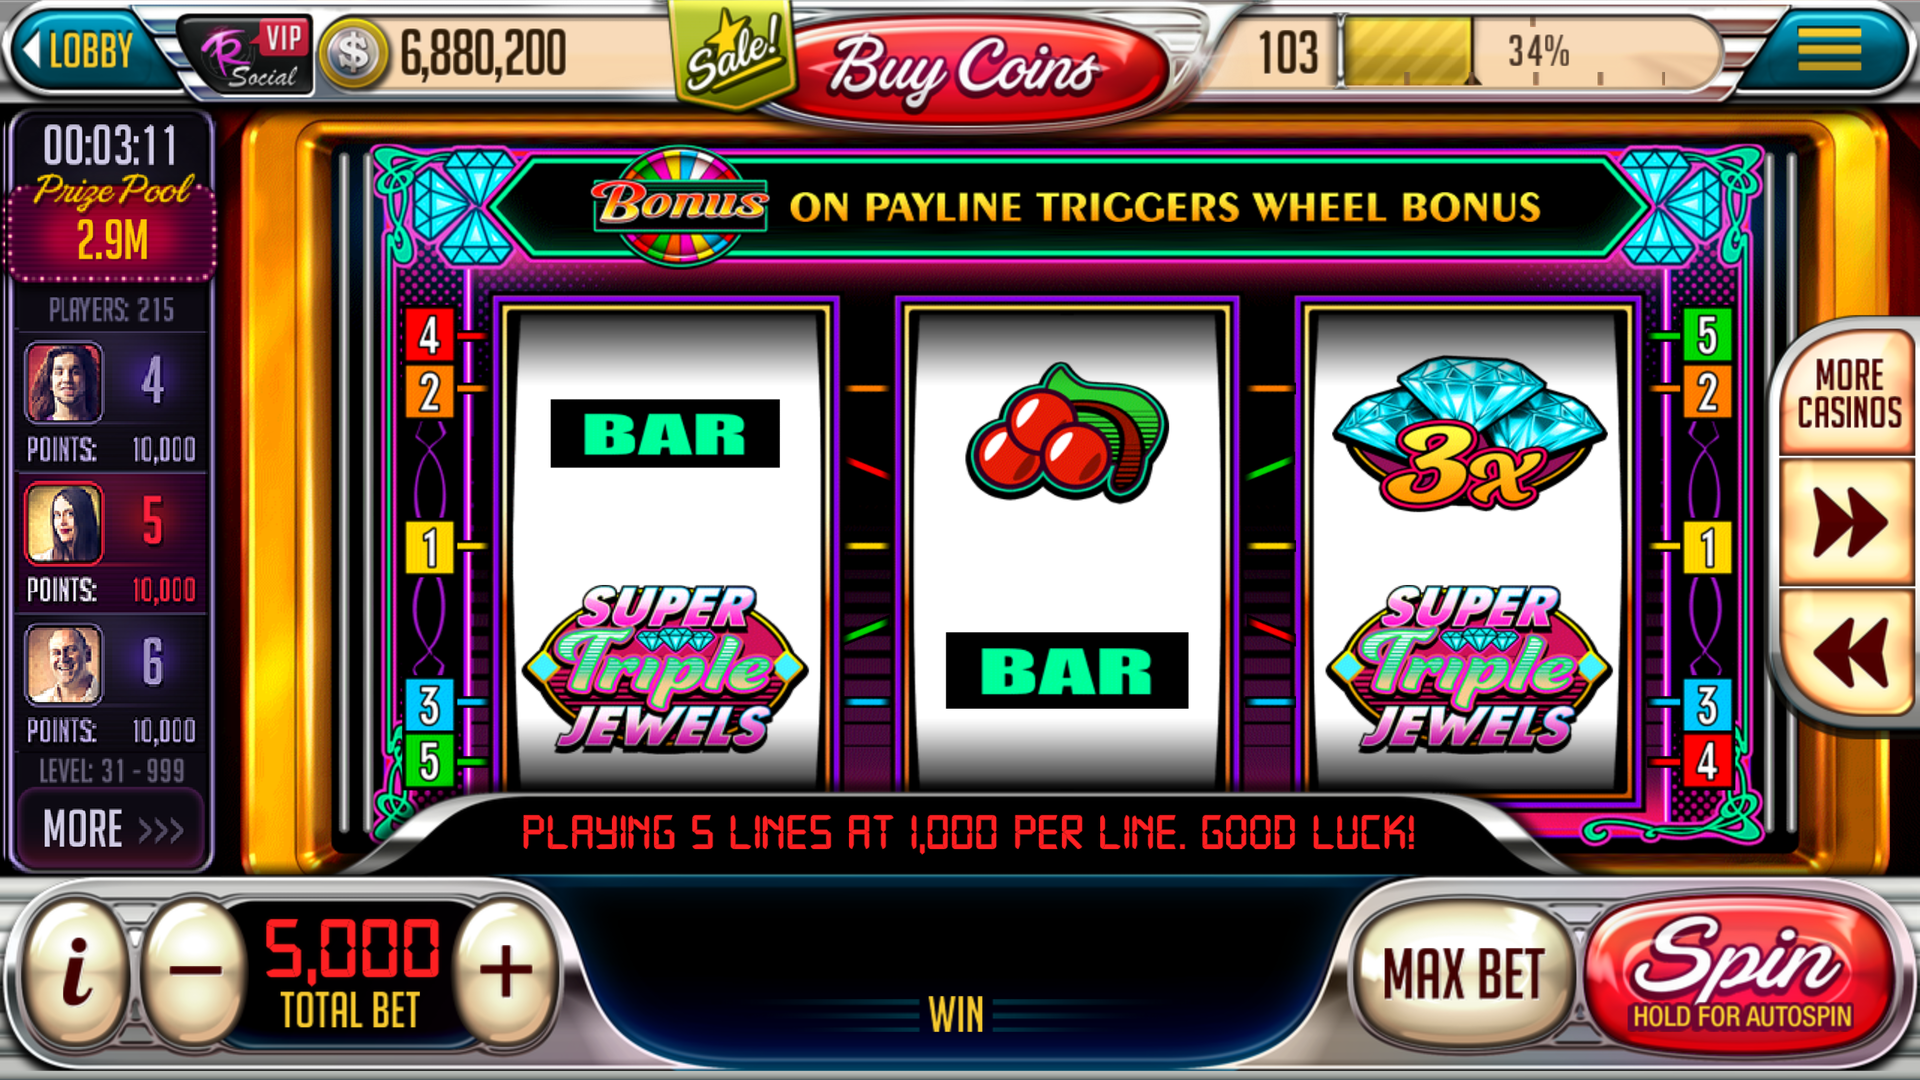 Wink slots promotion code free